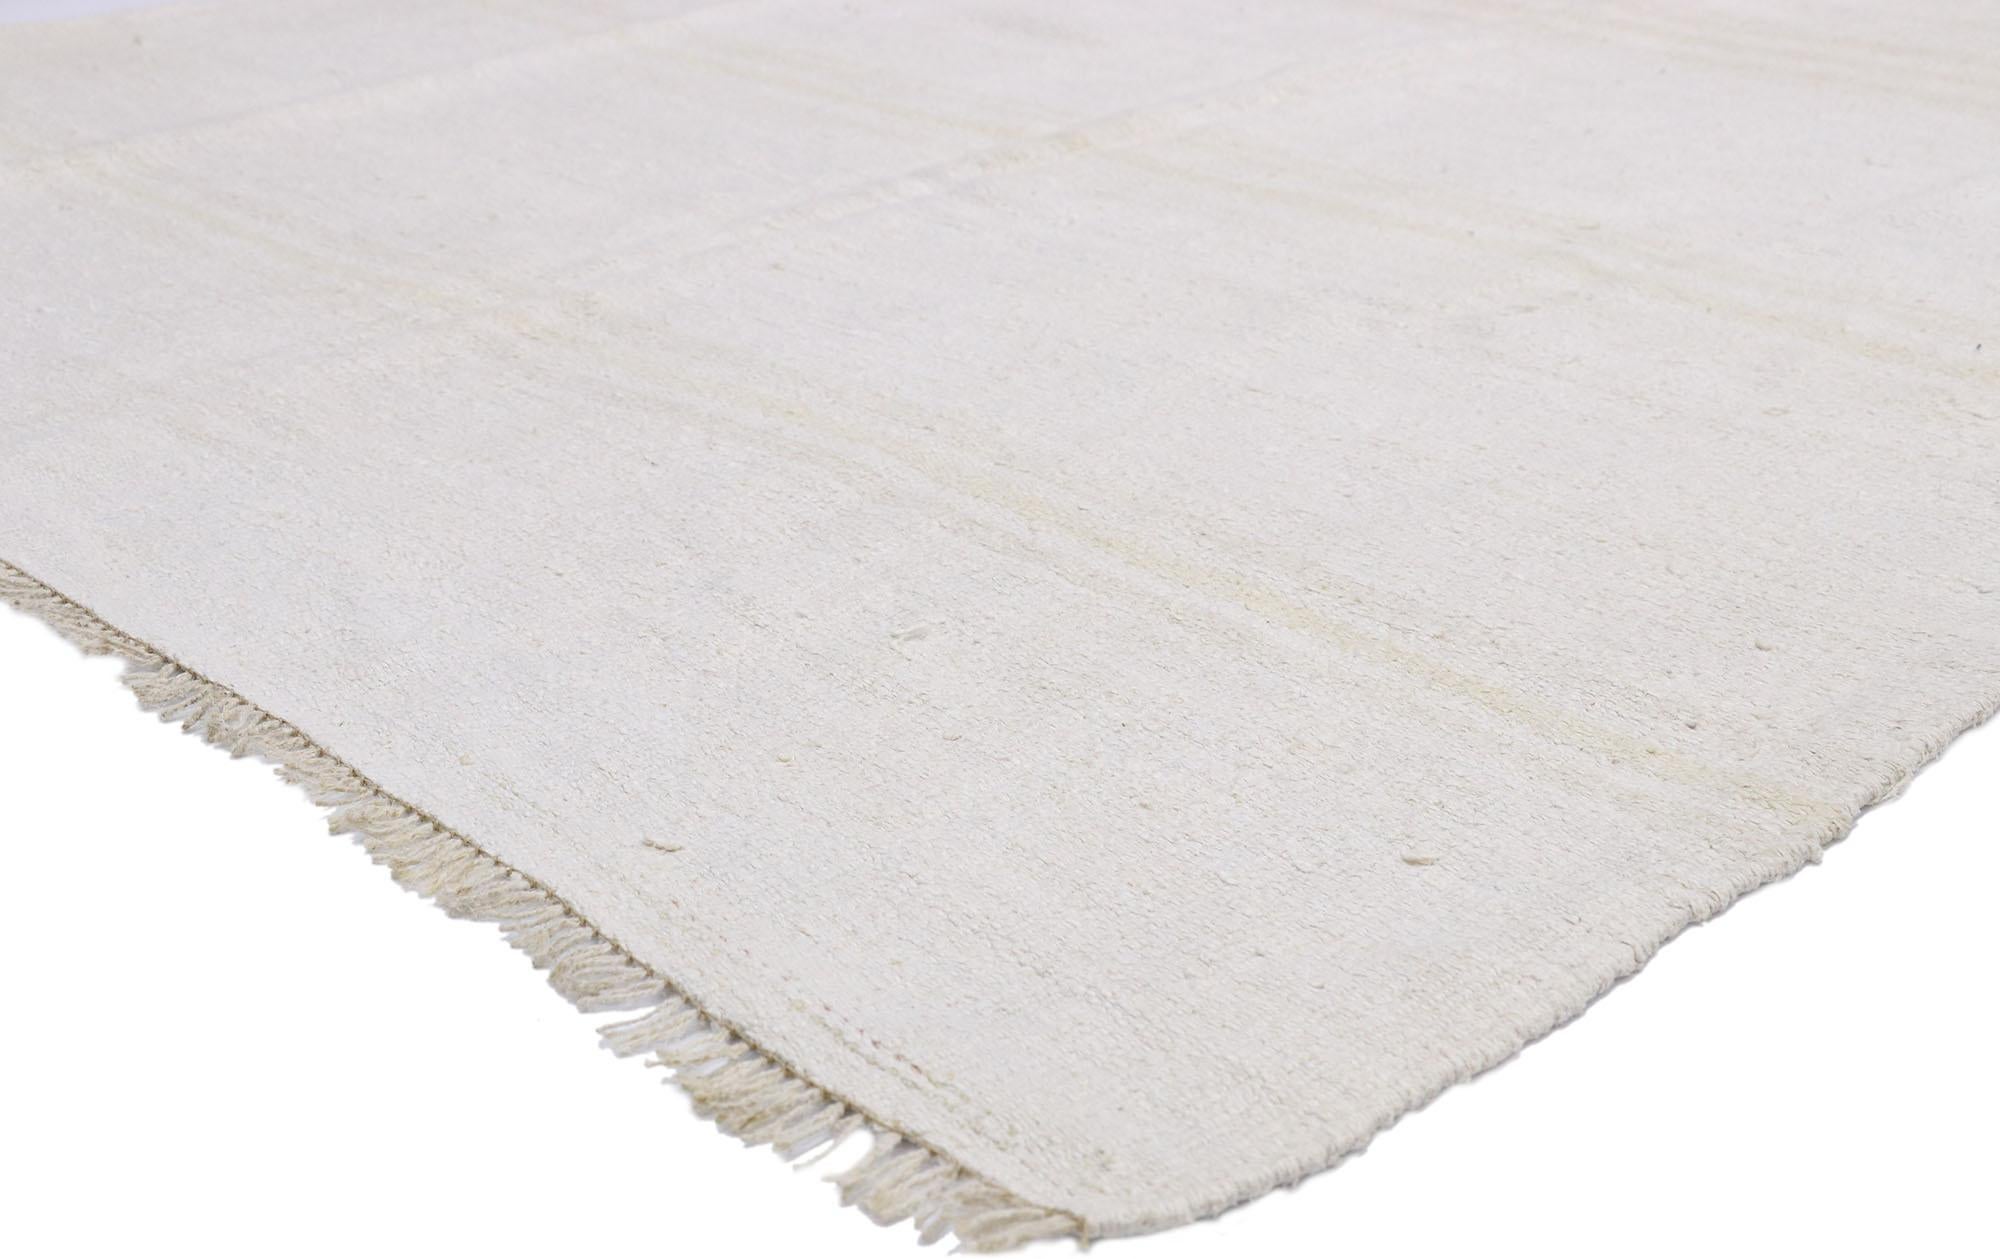 52621, vintage Turkish Kilim area rug with Organic Modern style. The neutral hues and clean sophistication in this handwoven wool vintage Turkish Kilim area rug beautifully embodies Organic Modern style. It features a series of horizontal lines